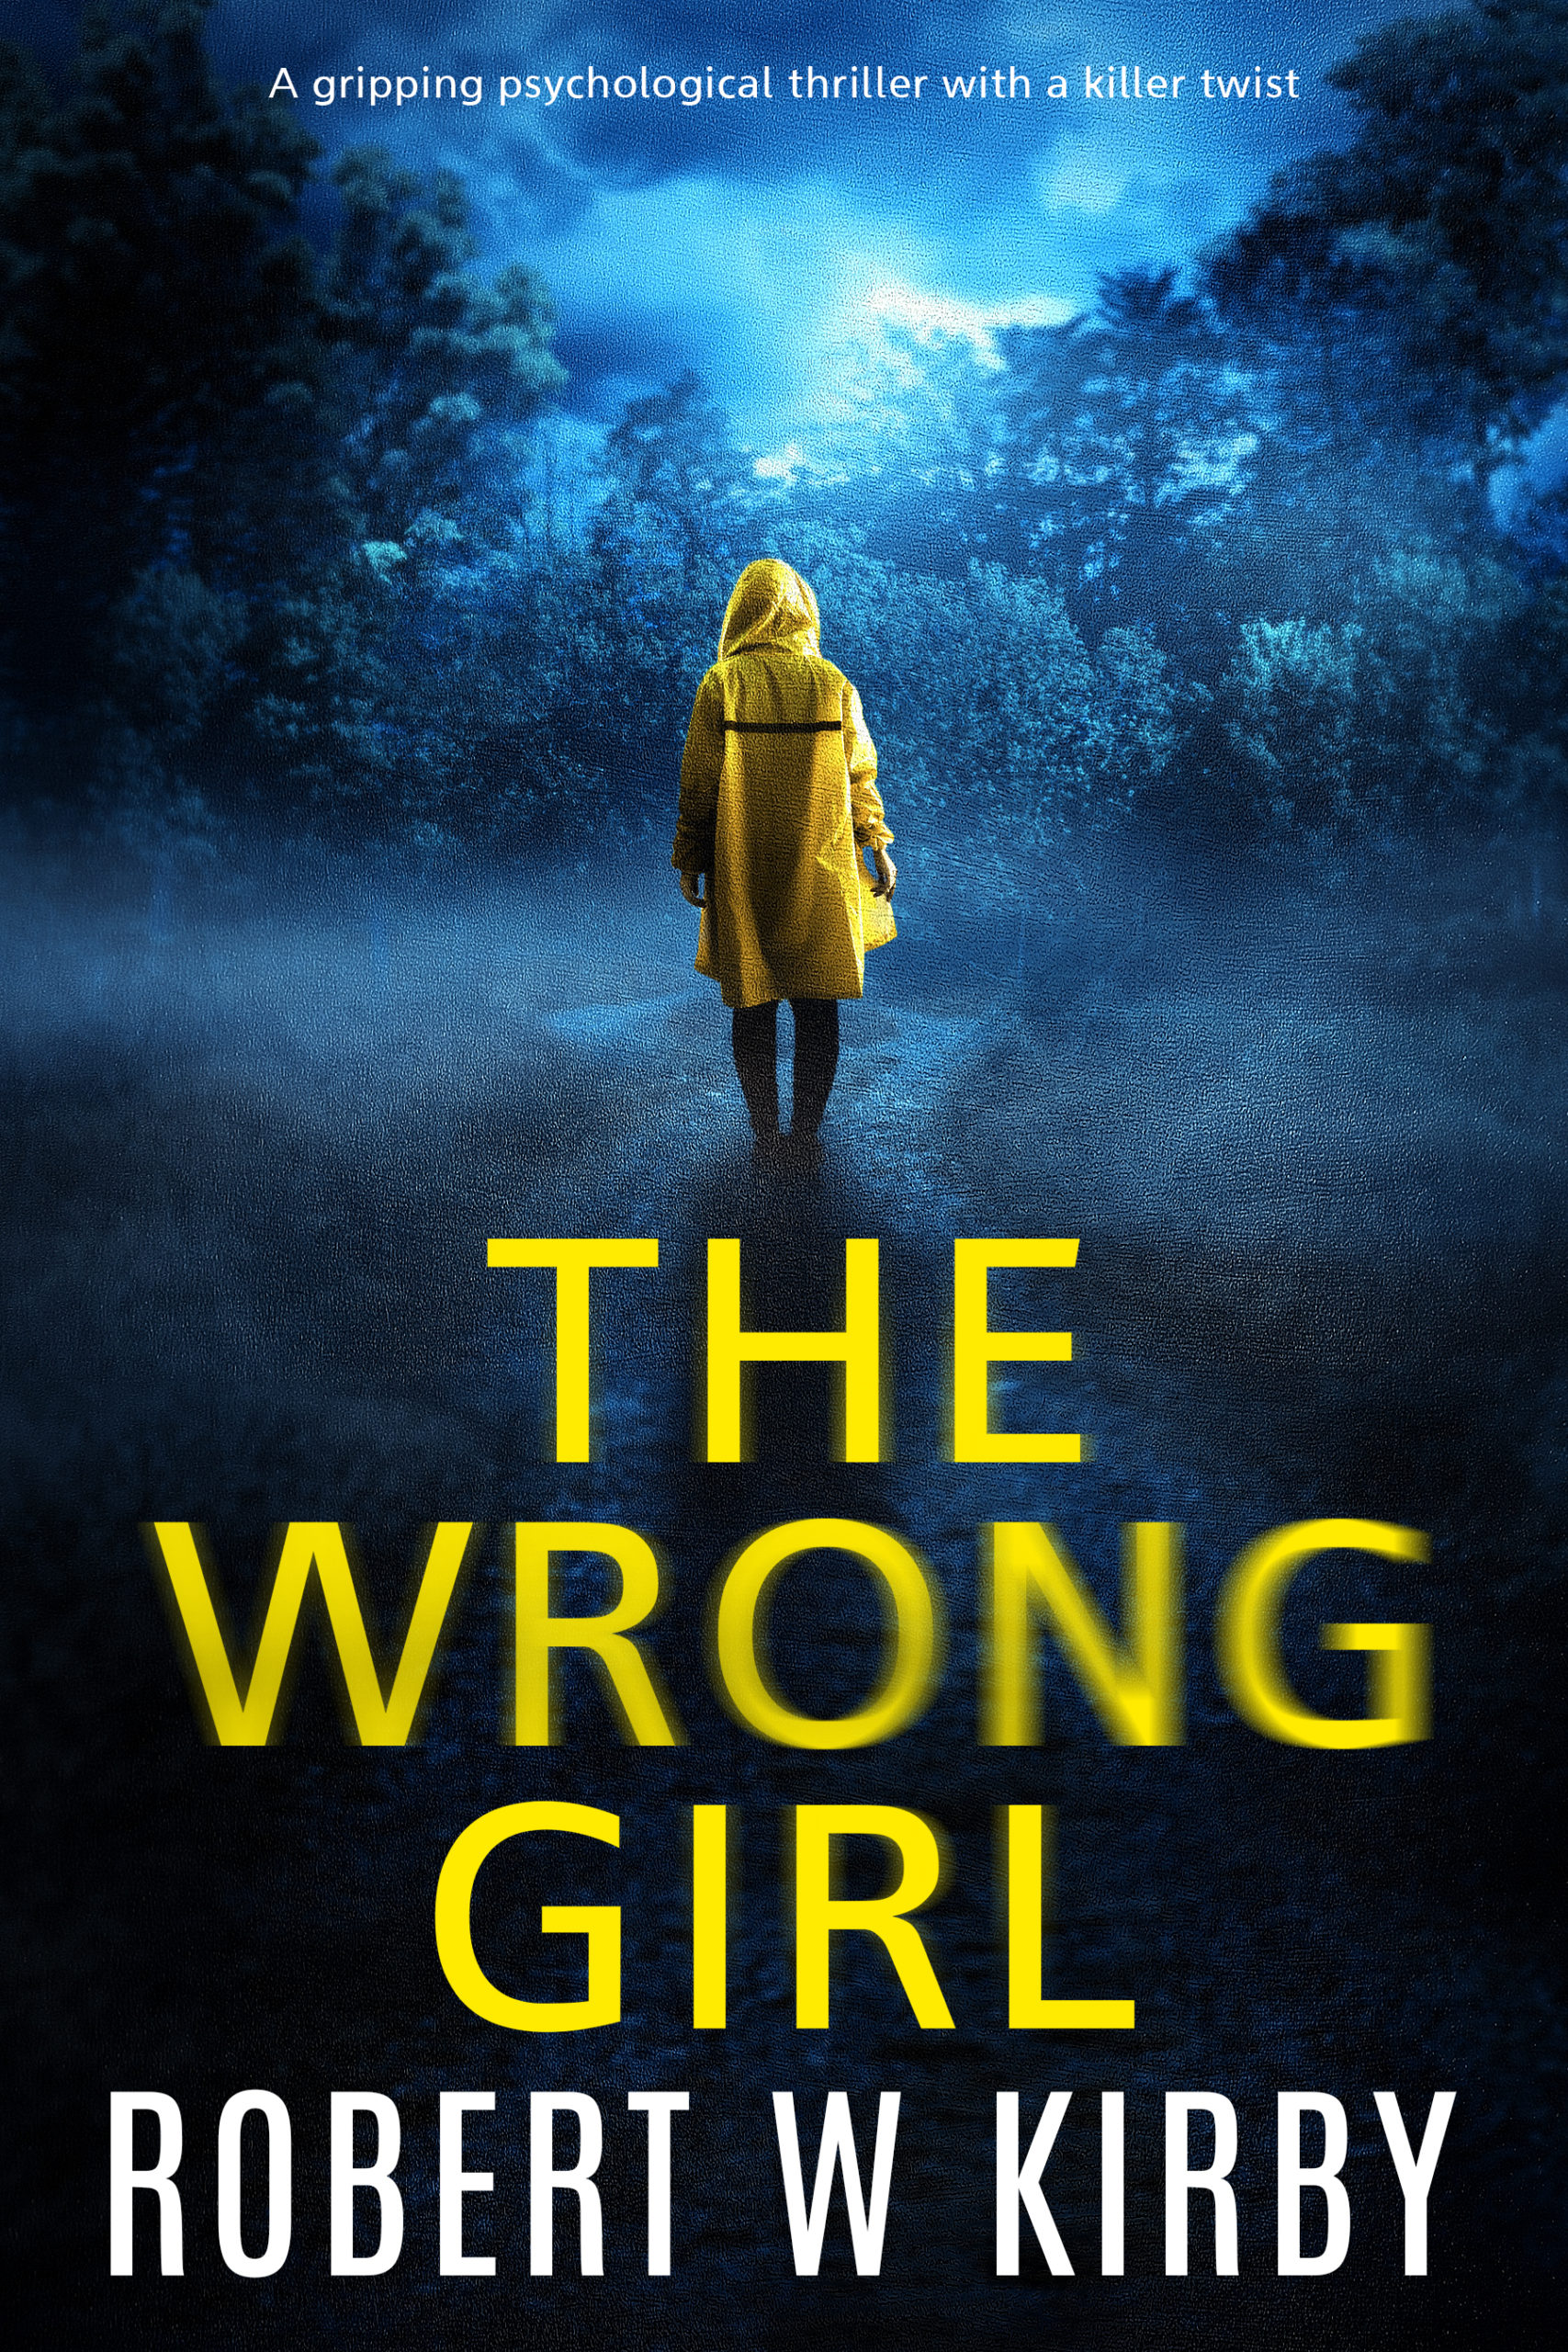 ROBERT KIRBY NEW RELEASE – THE WRONG GIRL